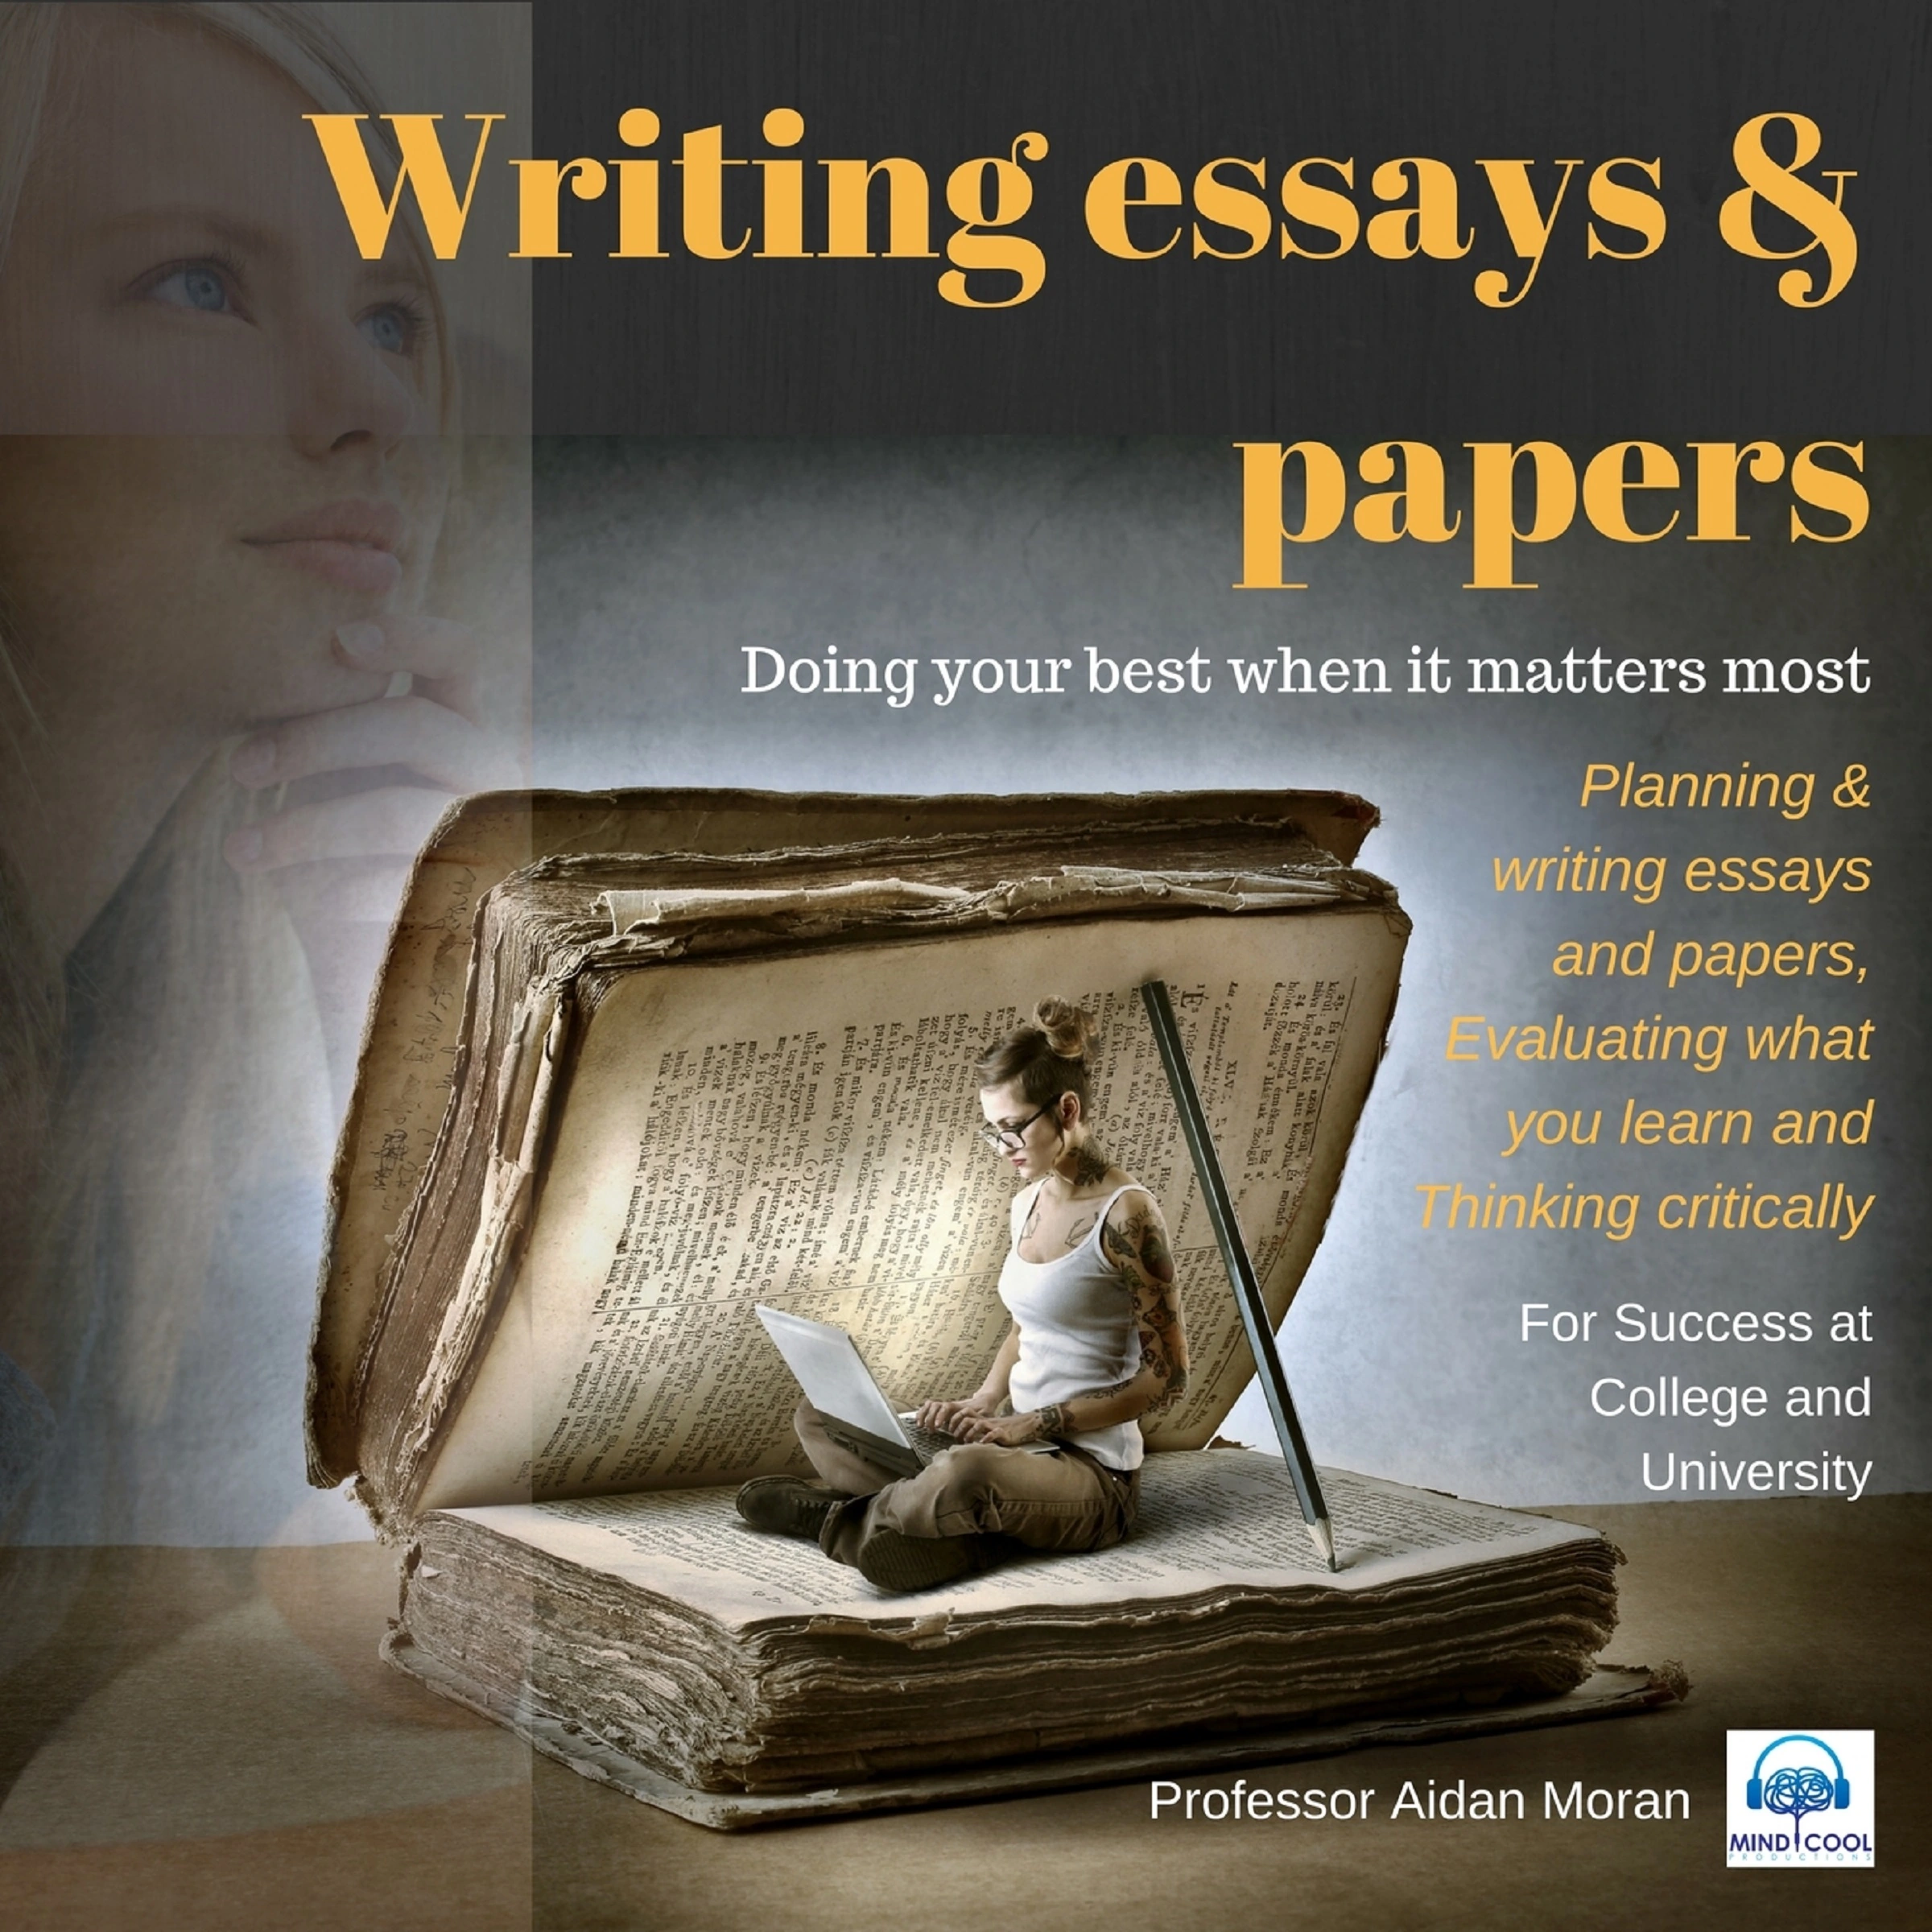 Writing essays & papers: For Success at College and University Audiobook by Professor Aidan Moran